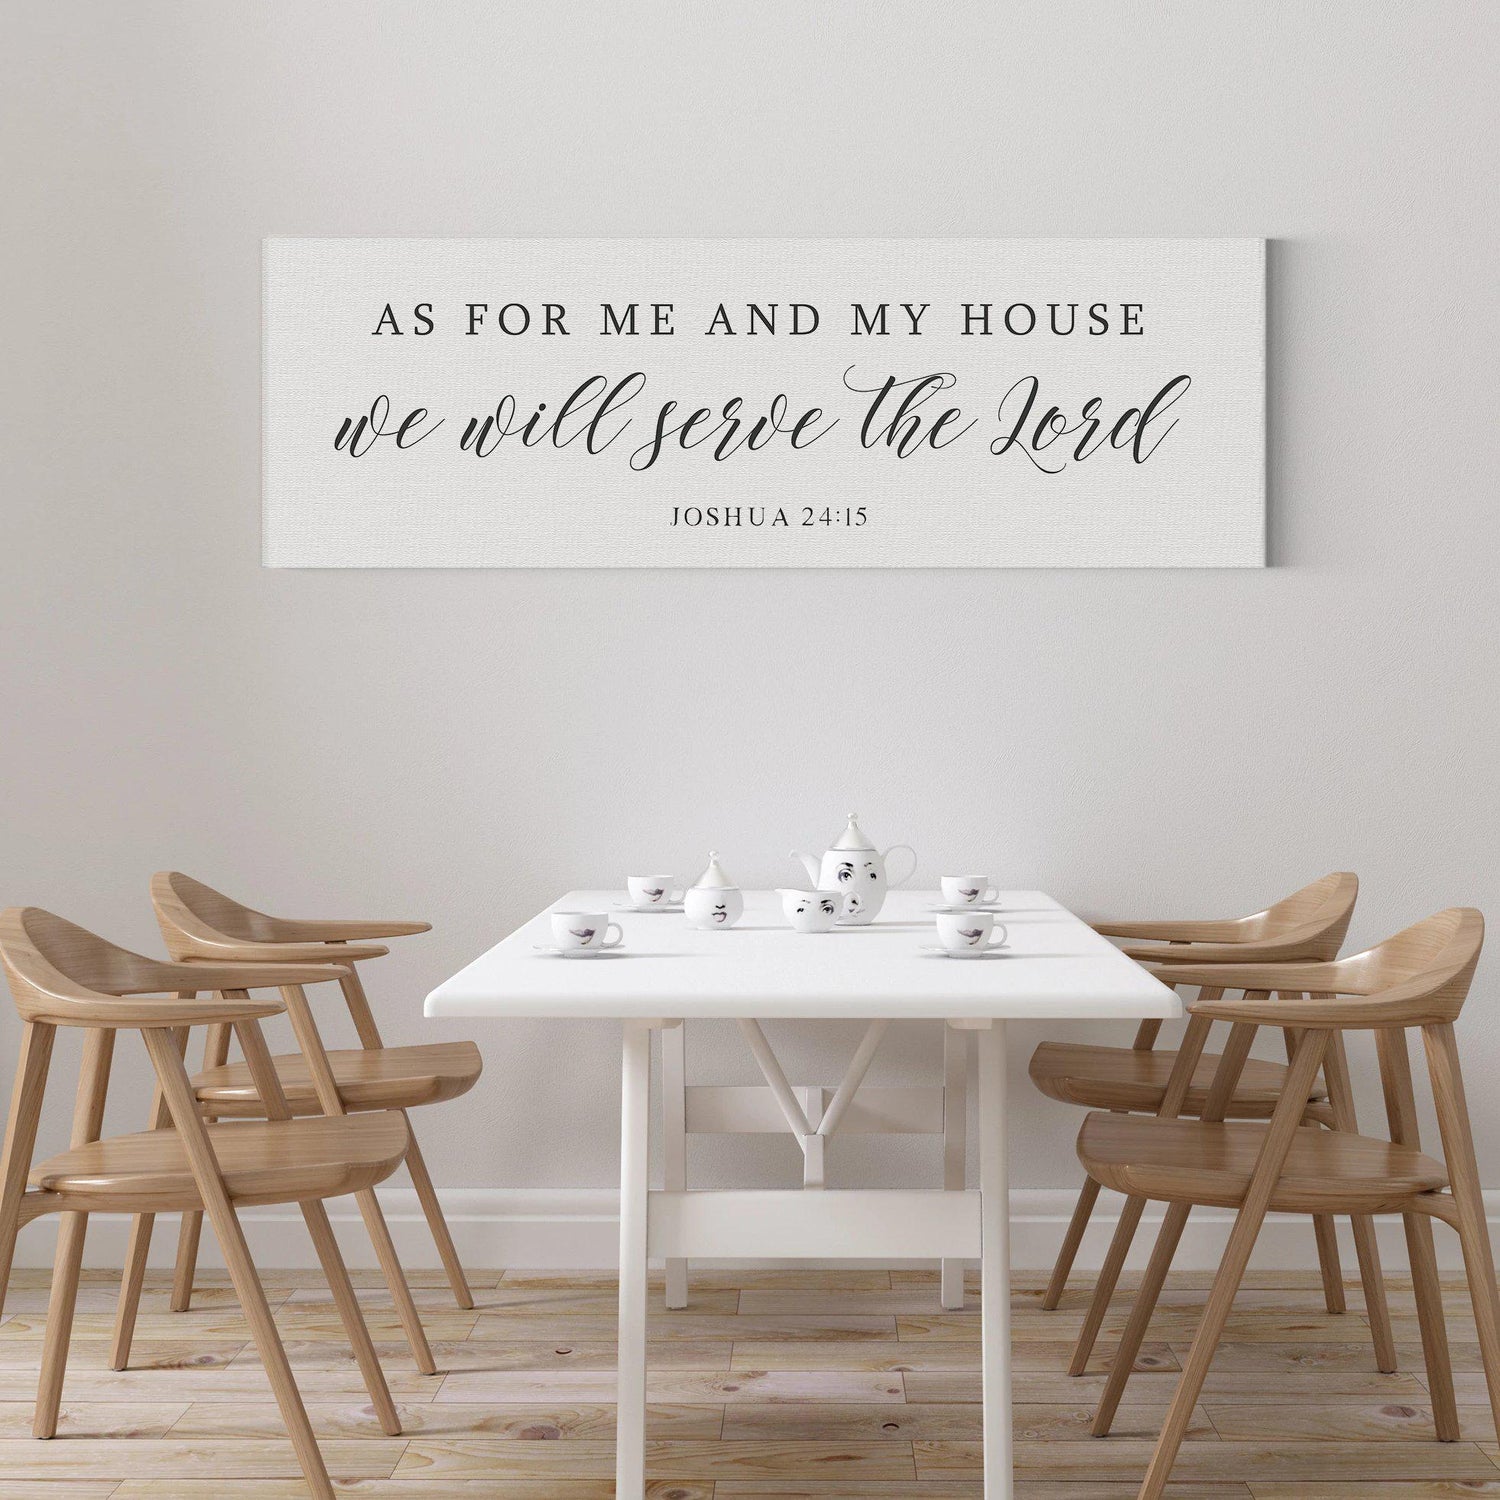 As For Me and My House | Joshua 24:15 | Bible Verse Wall Art - Forever Written